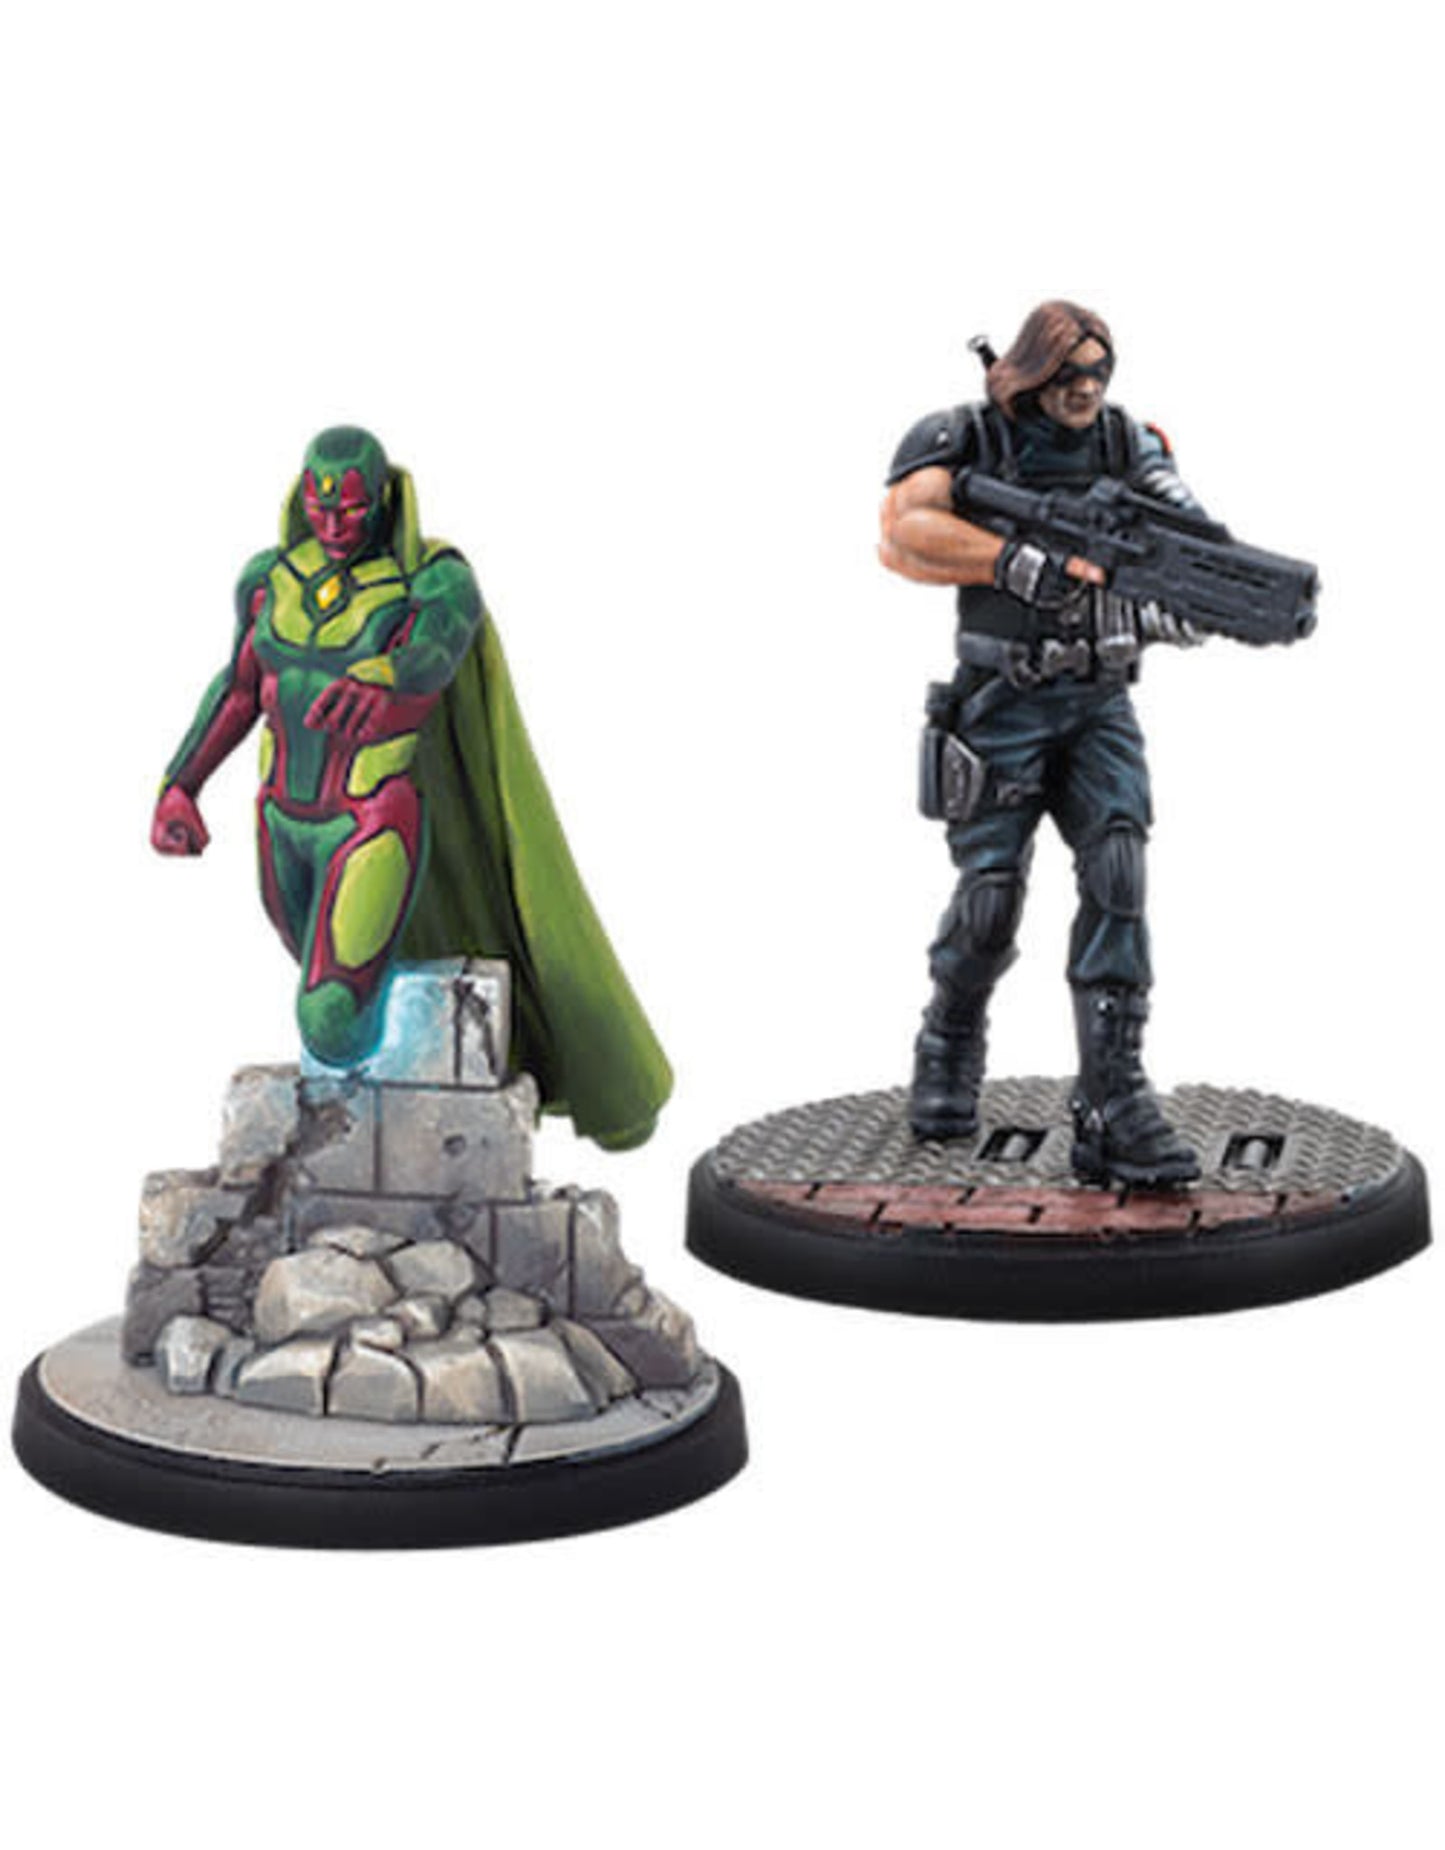 Marvel Crisis Protocol: Vision And Winter Soldier Character Pack